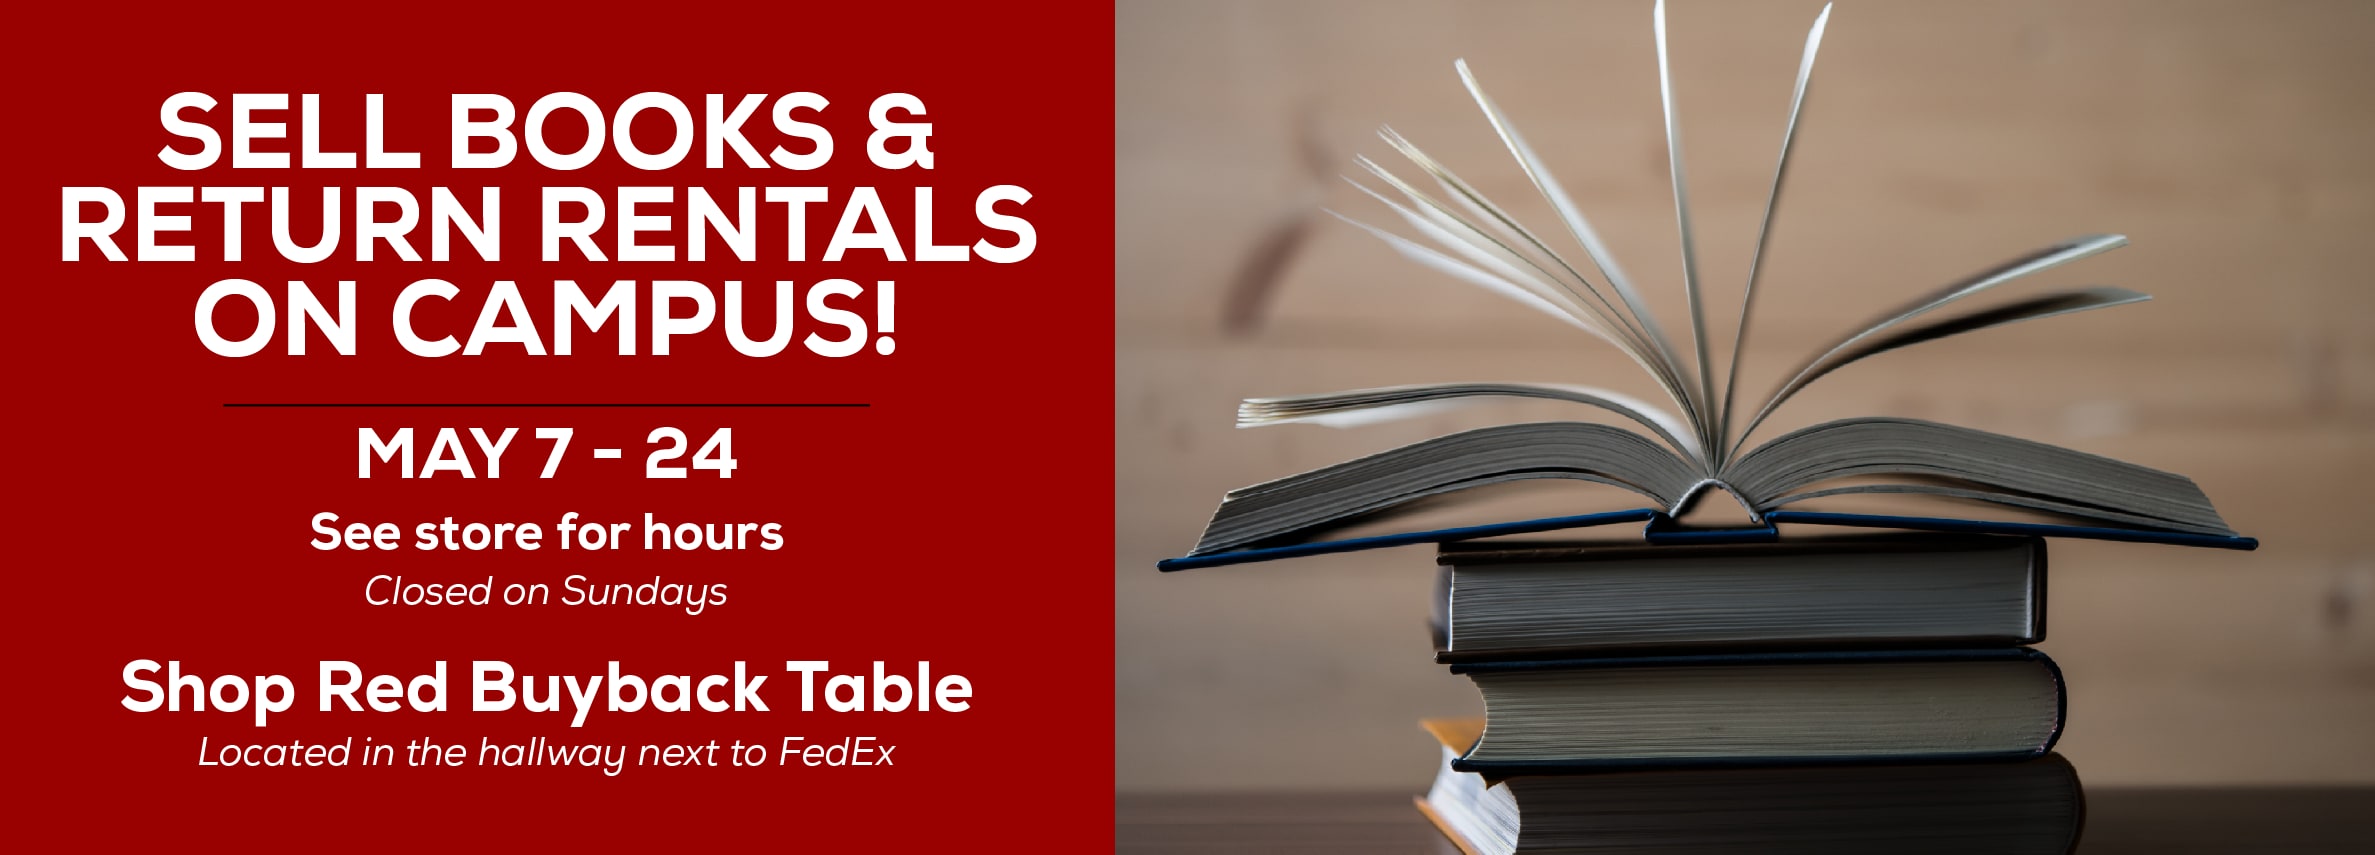 Sell books and return rentals on campus! May 7 - 24. See store for hours. Closed on Sundays. Shop Red Buyback Table. Located in the hallway next to FedEx.